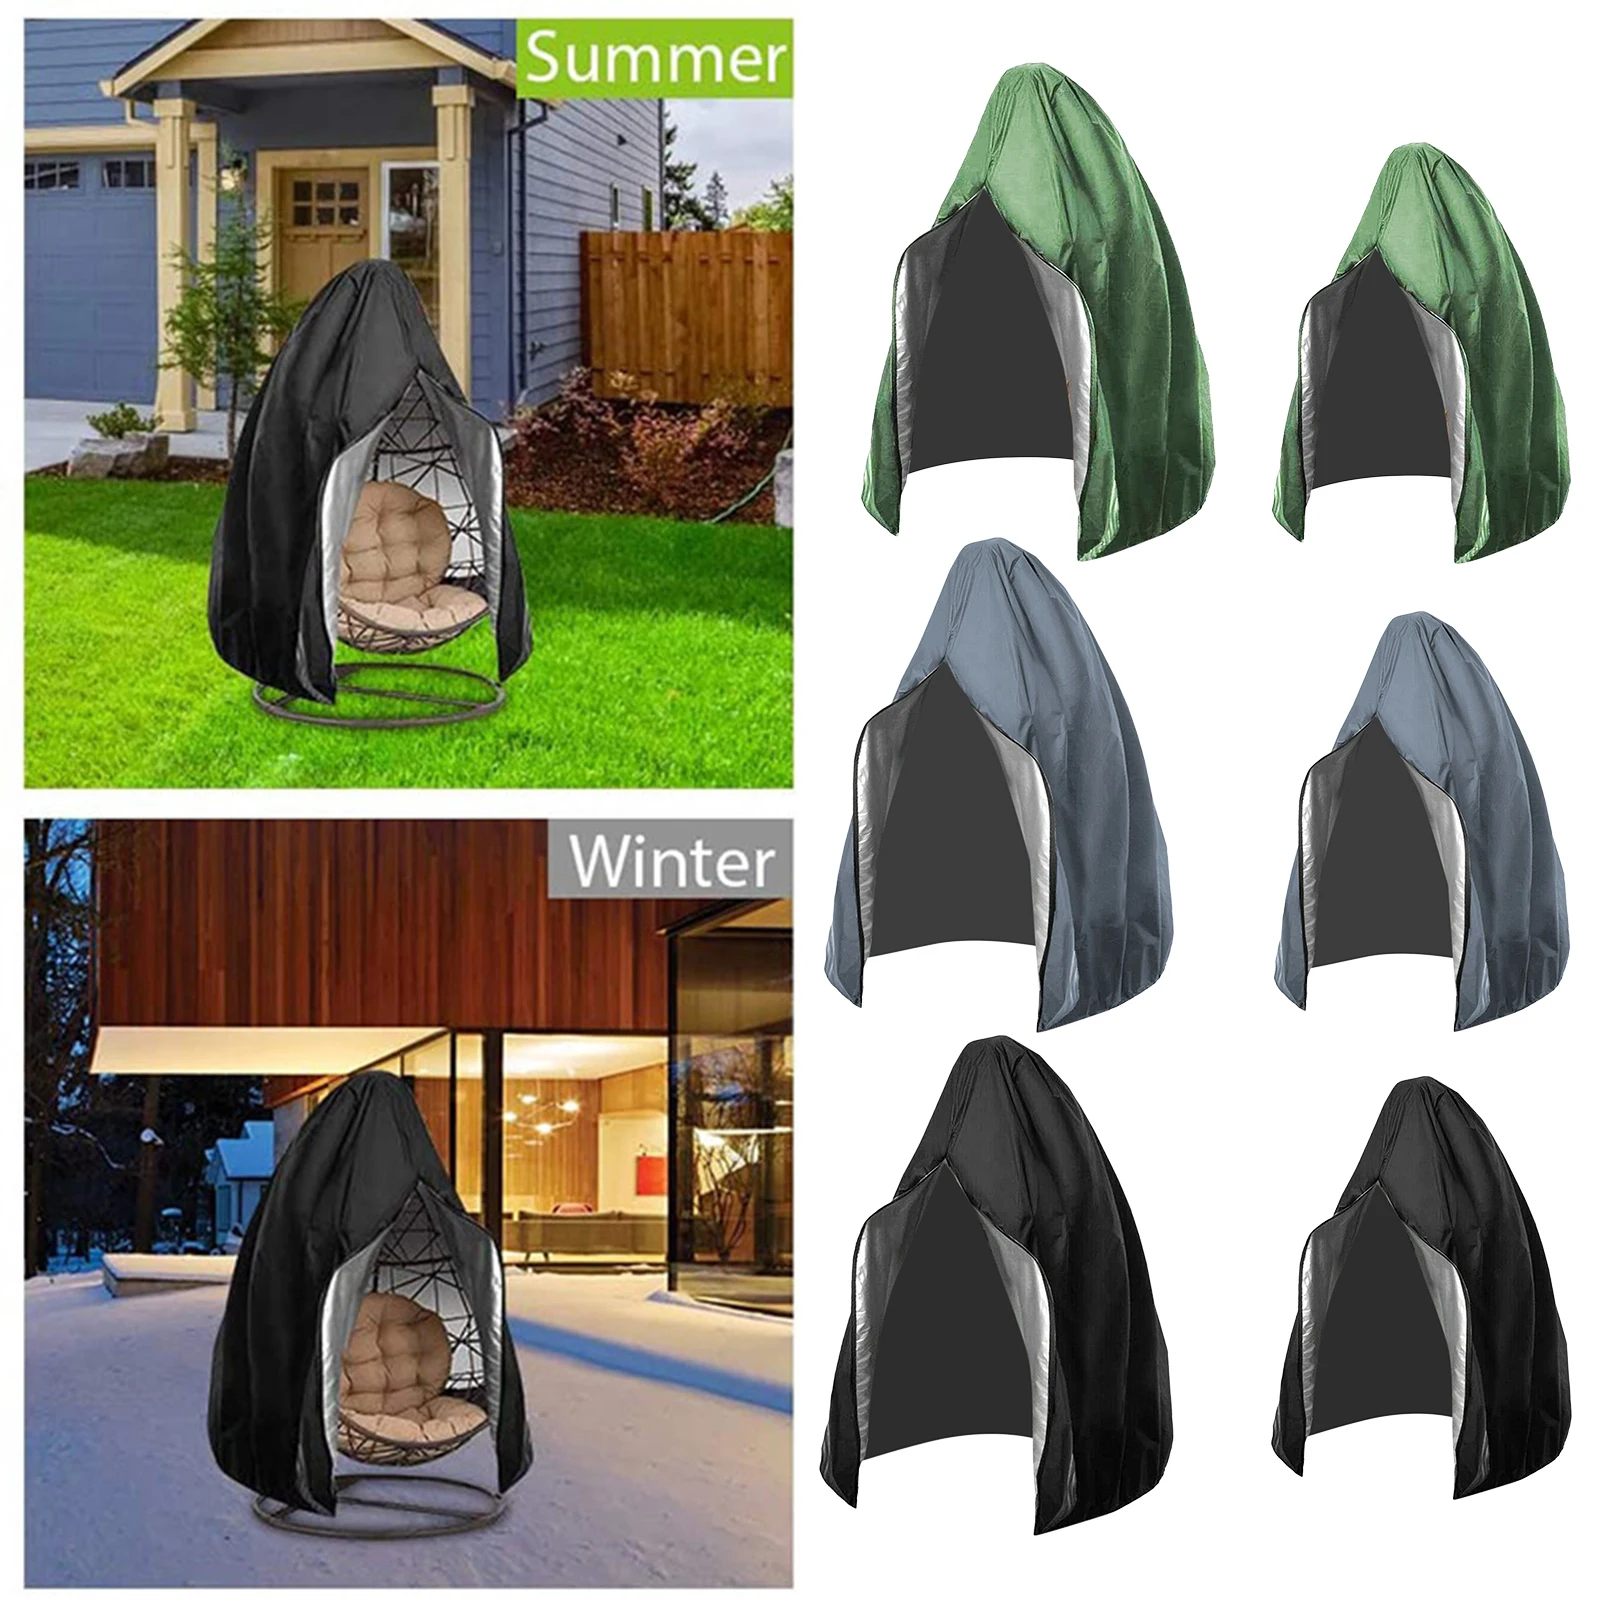 Waterproof Patio Chair Cover Egg Swing Chair Dust Cover Protector With Zipper Outdoor Hanging Egg Chairs Rain Cover